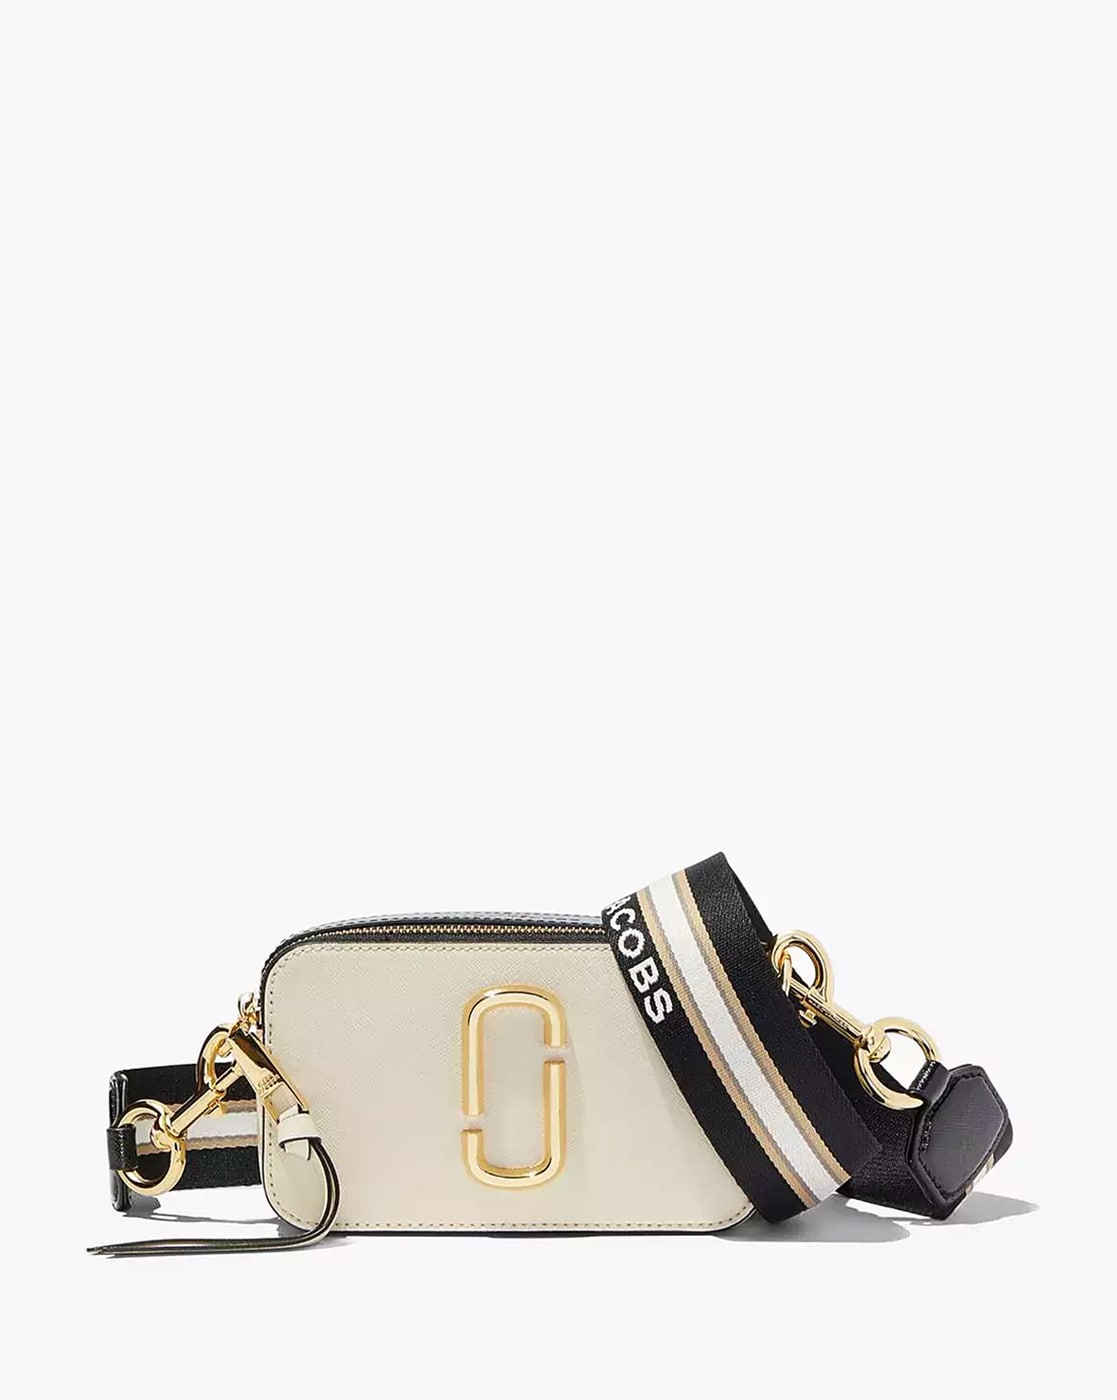 Small Marc jacobs White purse | Marc jacobs bag, Marc jacobs handbag, Mark  jacobs bag